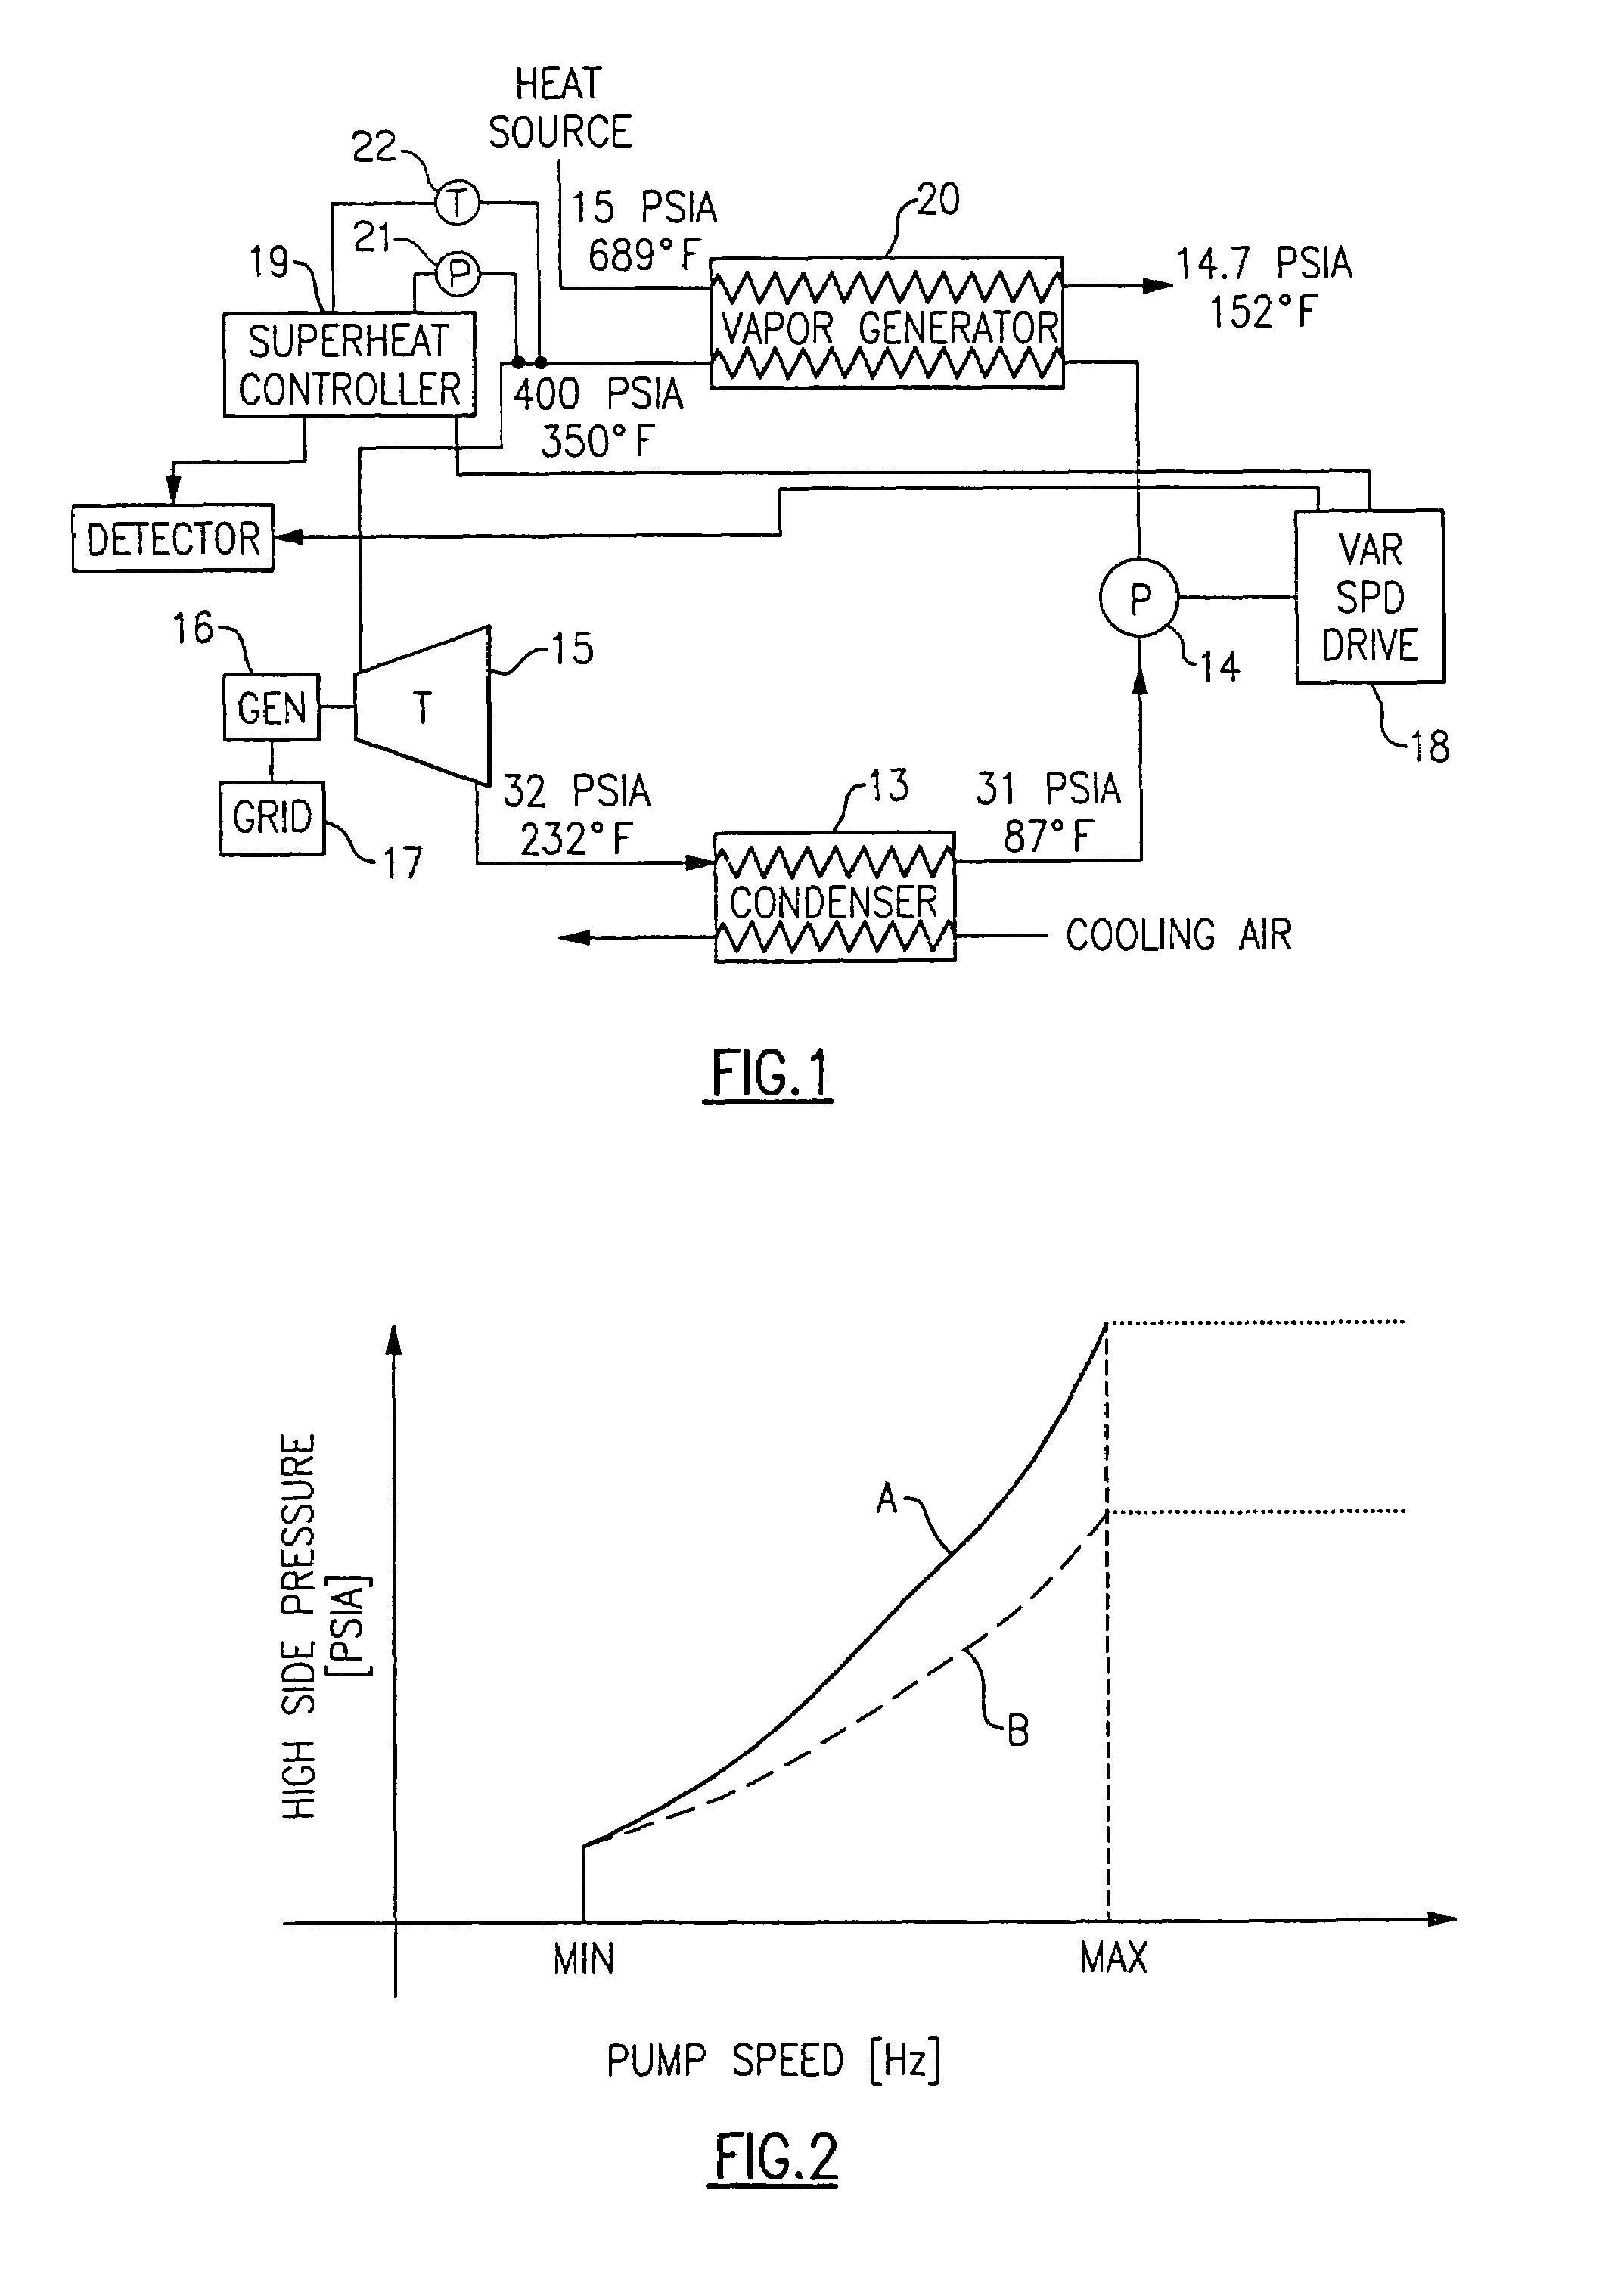 Apparatus and method for detecting low charge of working fluid in a waste heat recovery system